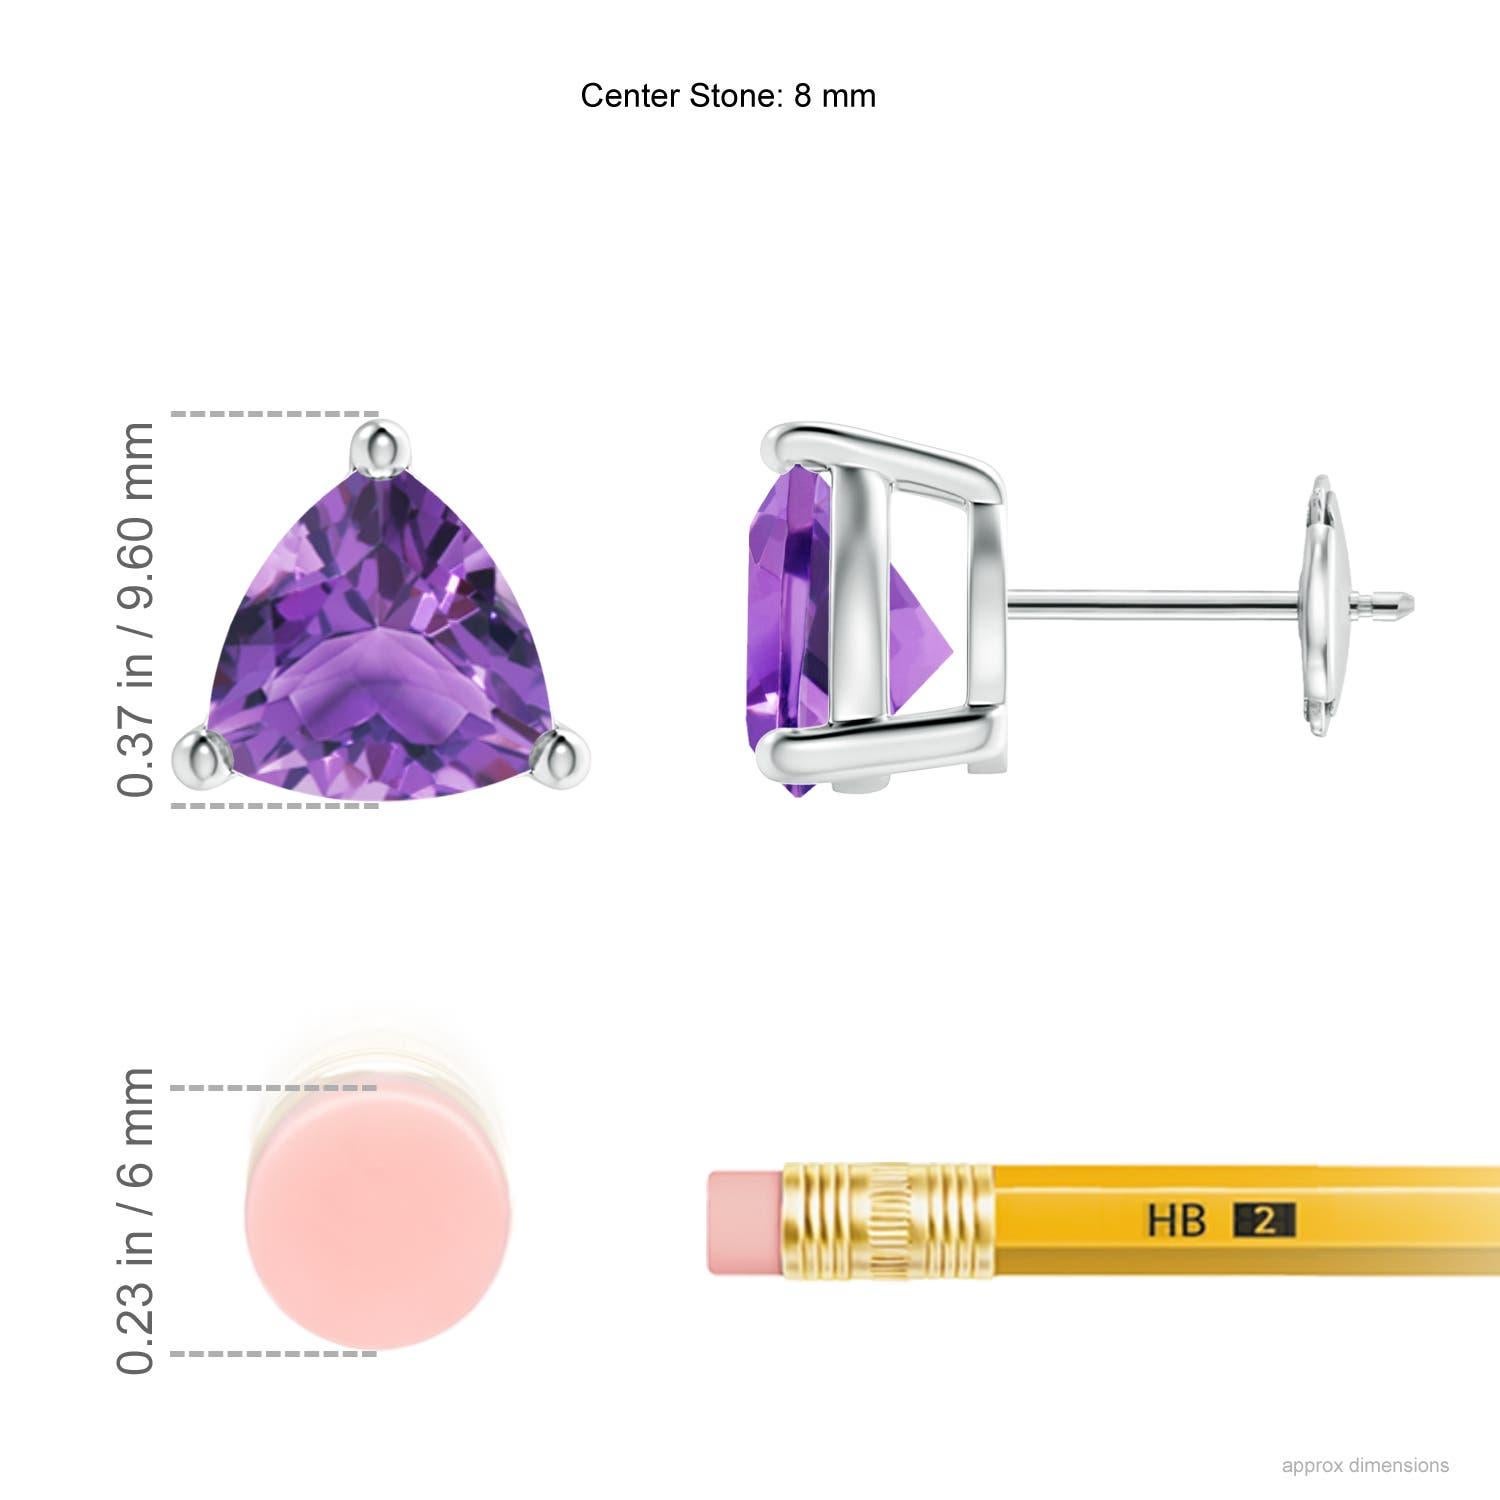 Displaying the royal purple amethysts in a prong setting, these solitaire stud earrings are a pair of enviable beauty. The gemstones are cut in a striking trillion shape and mounted in 14k white gold.